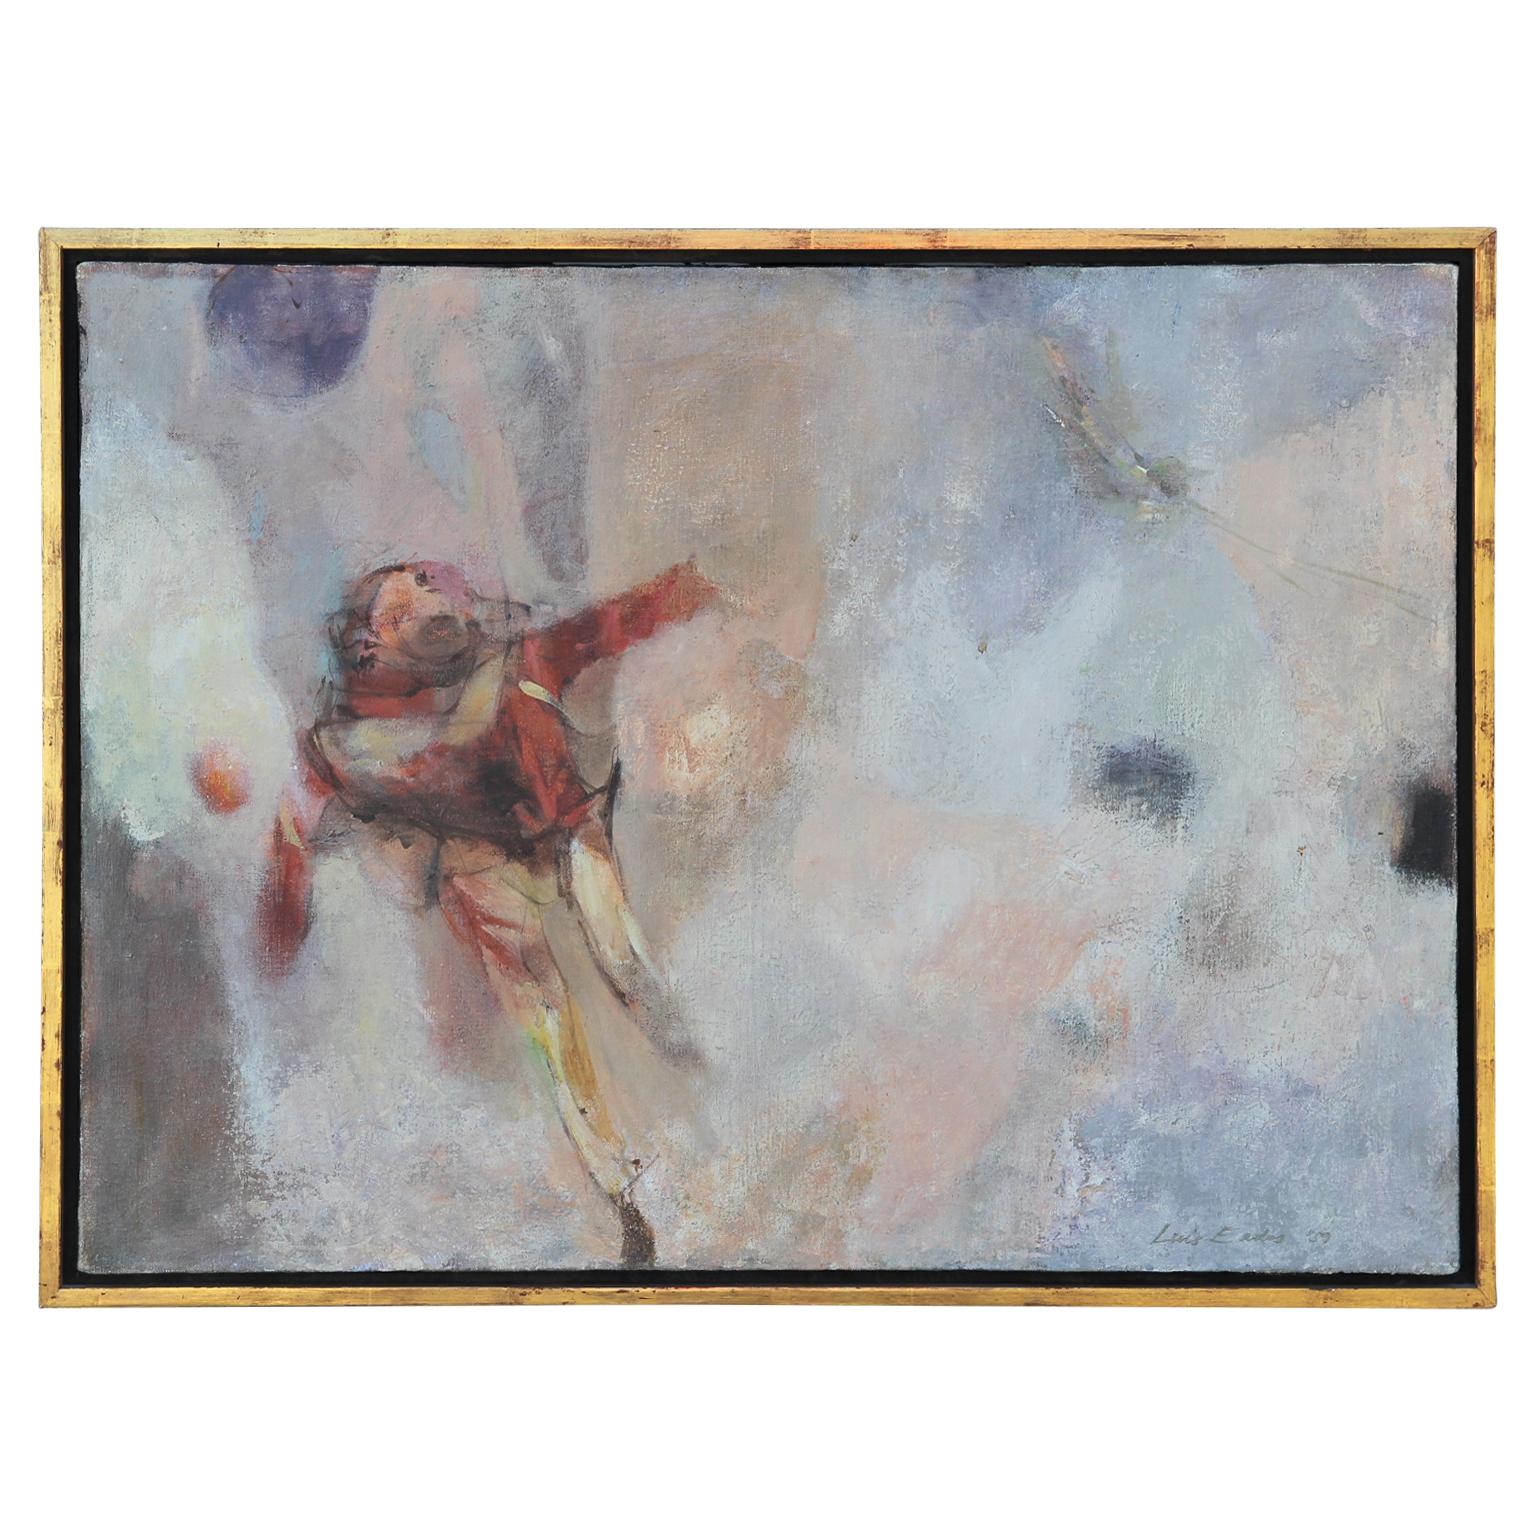 Luis Eades Figurative Painting - ��“Paratrooper” Modern Abstract Impressionist Figurative Portrait of Soldier